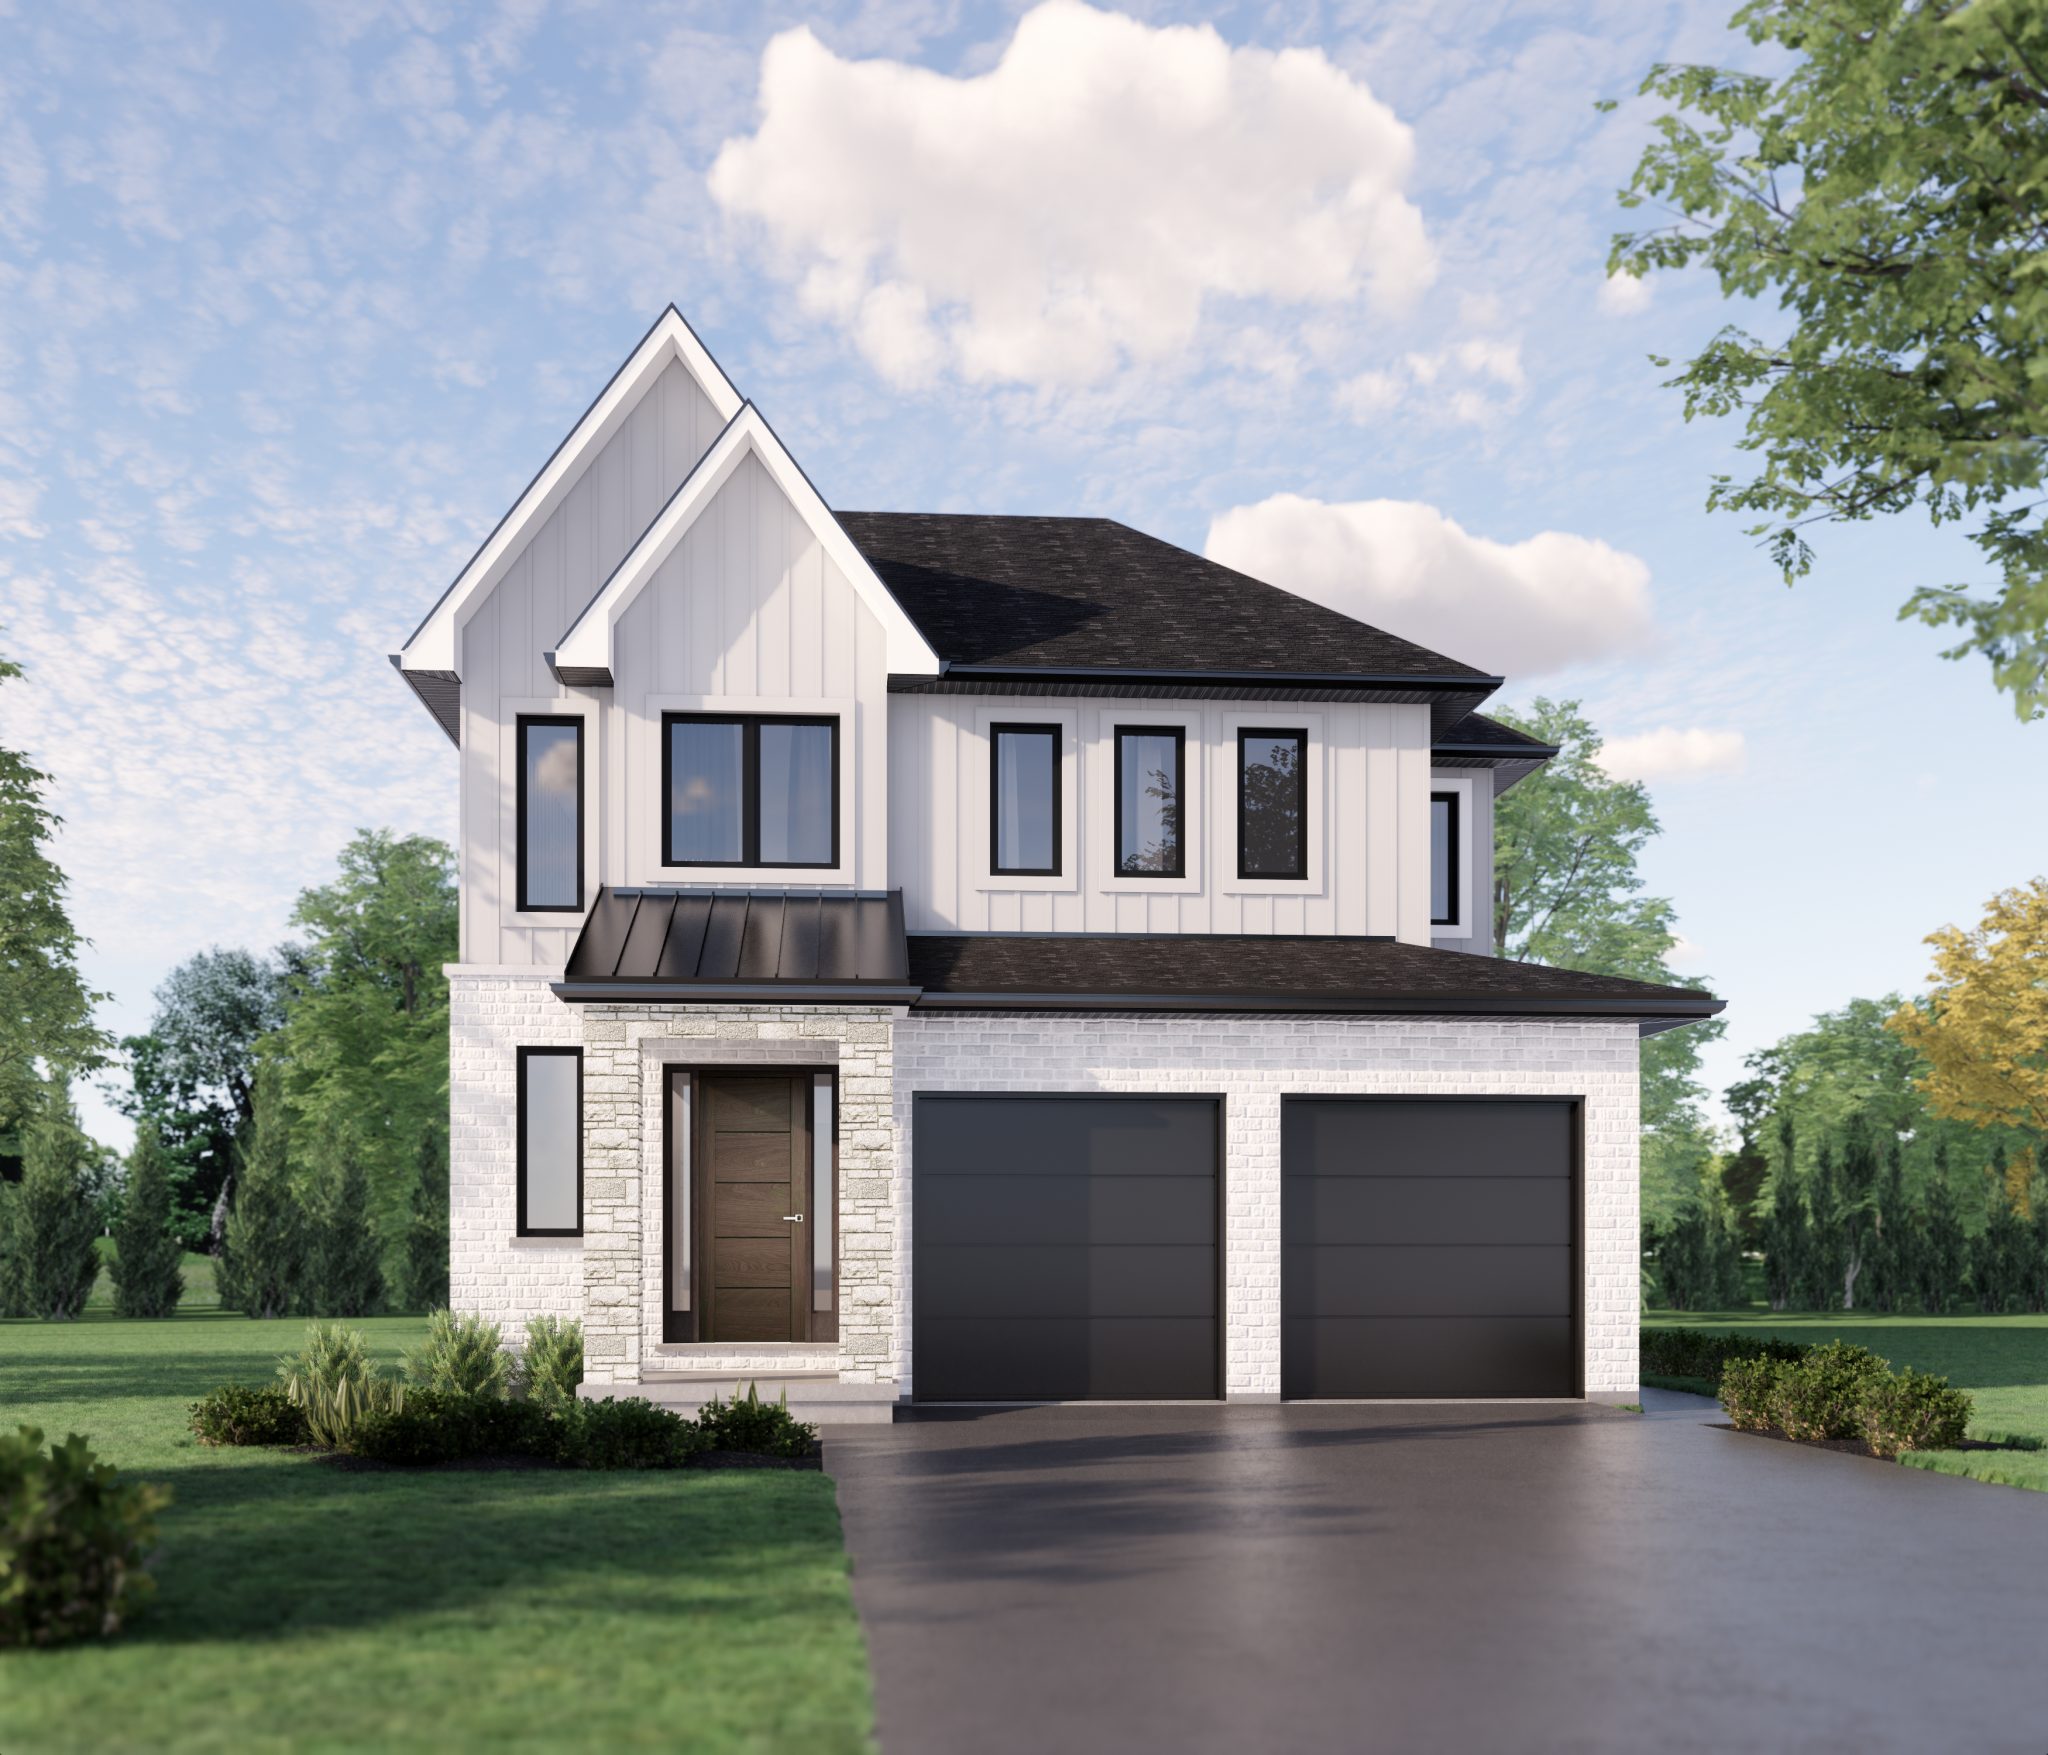 Everton Homes presents the Brookline model home